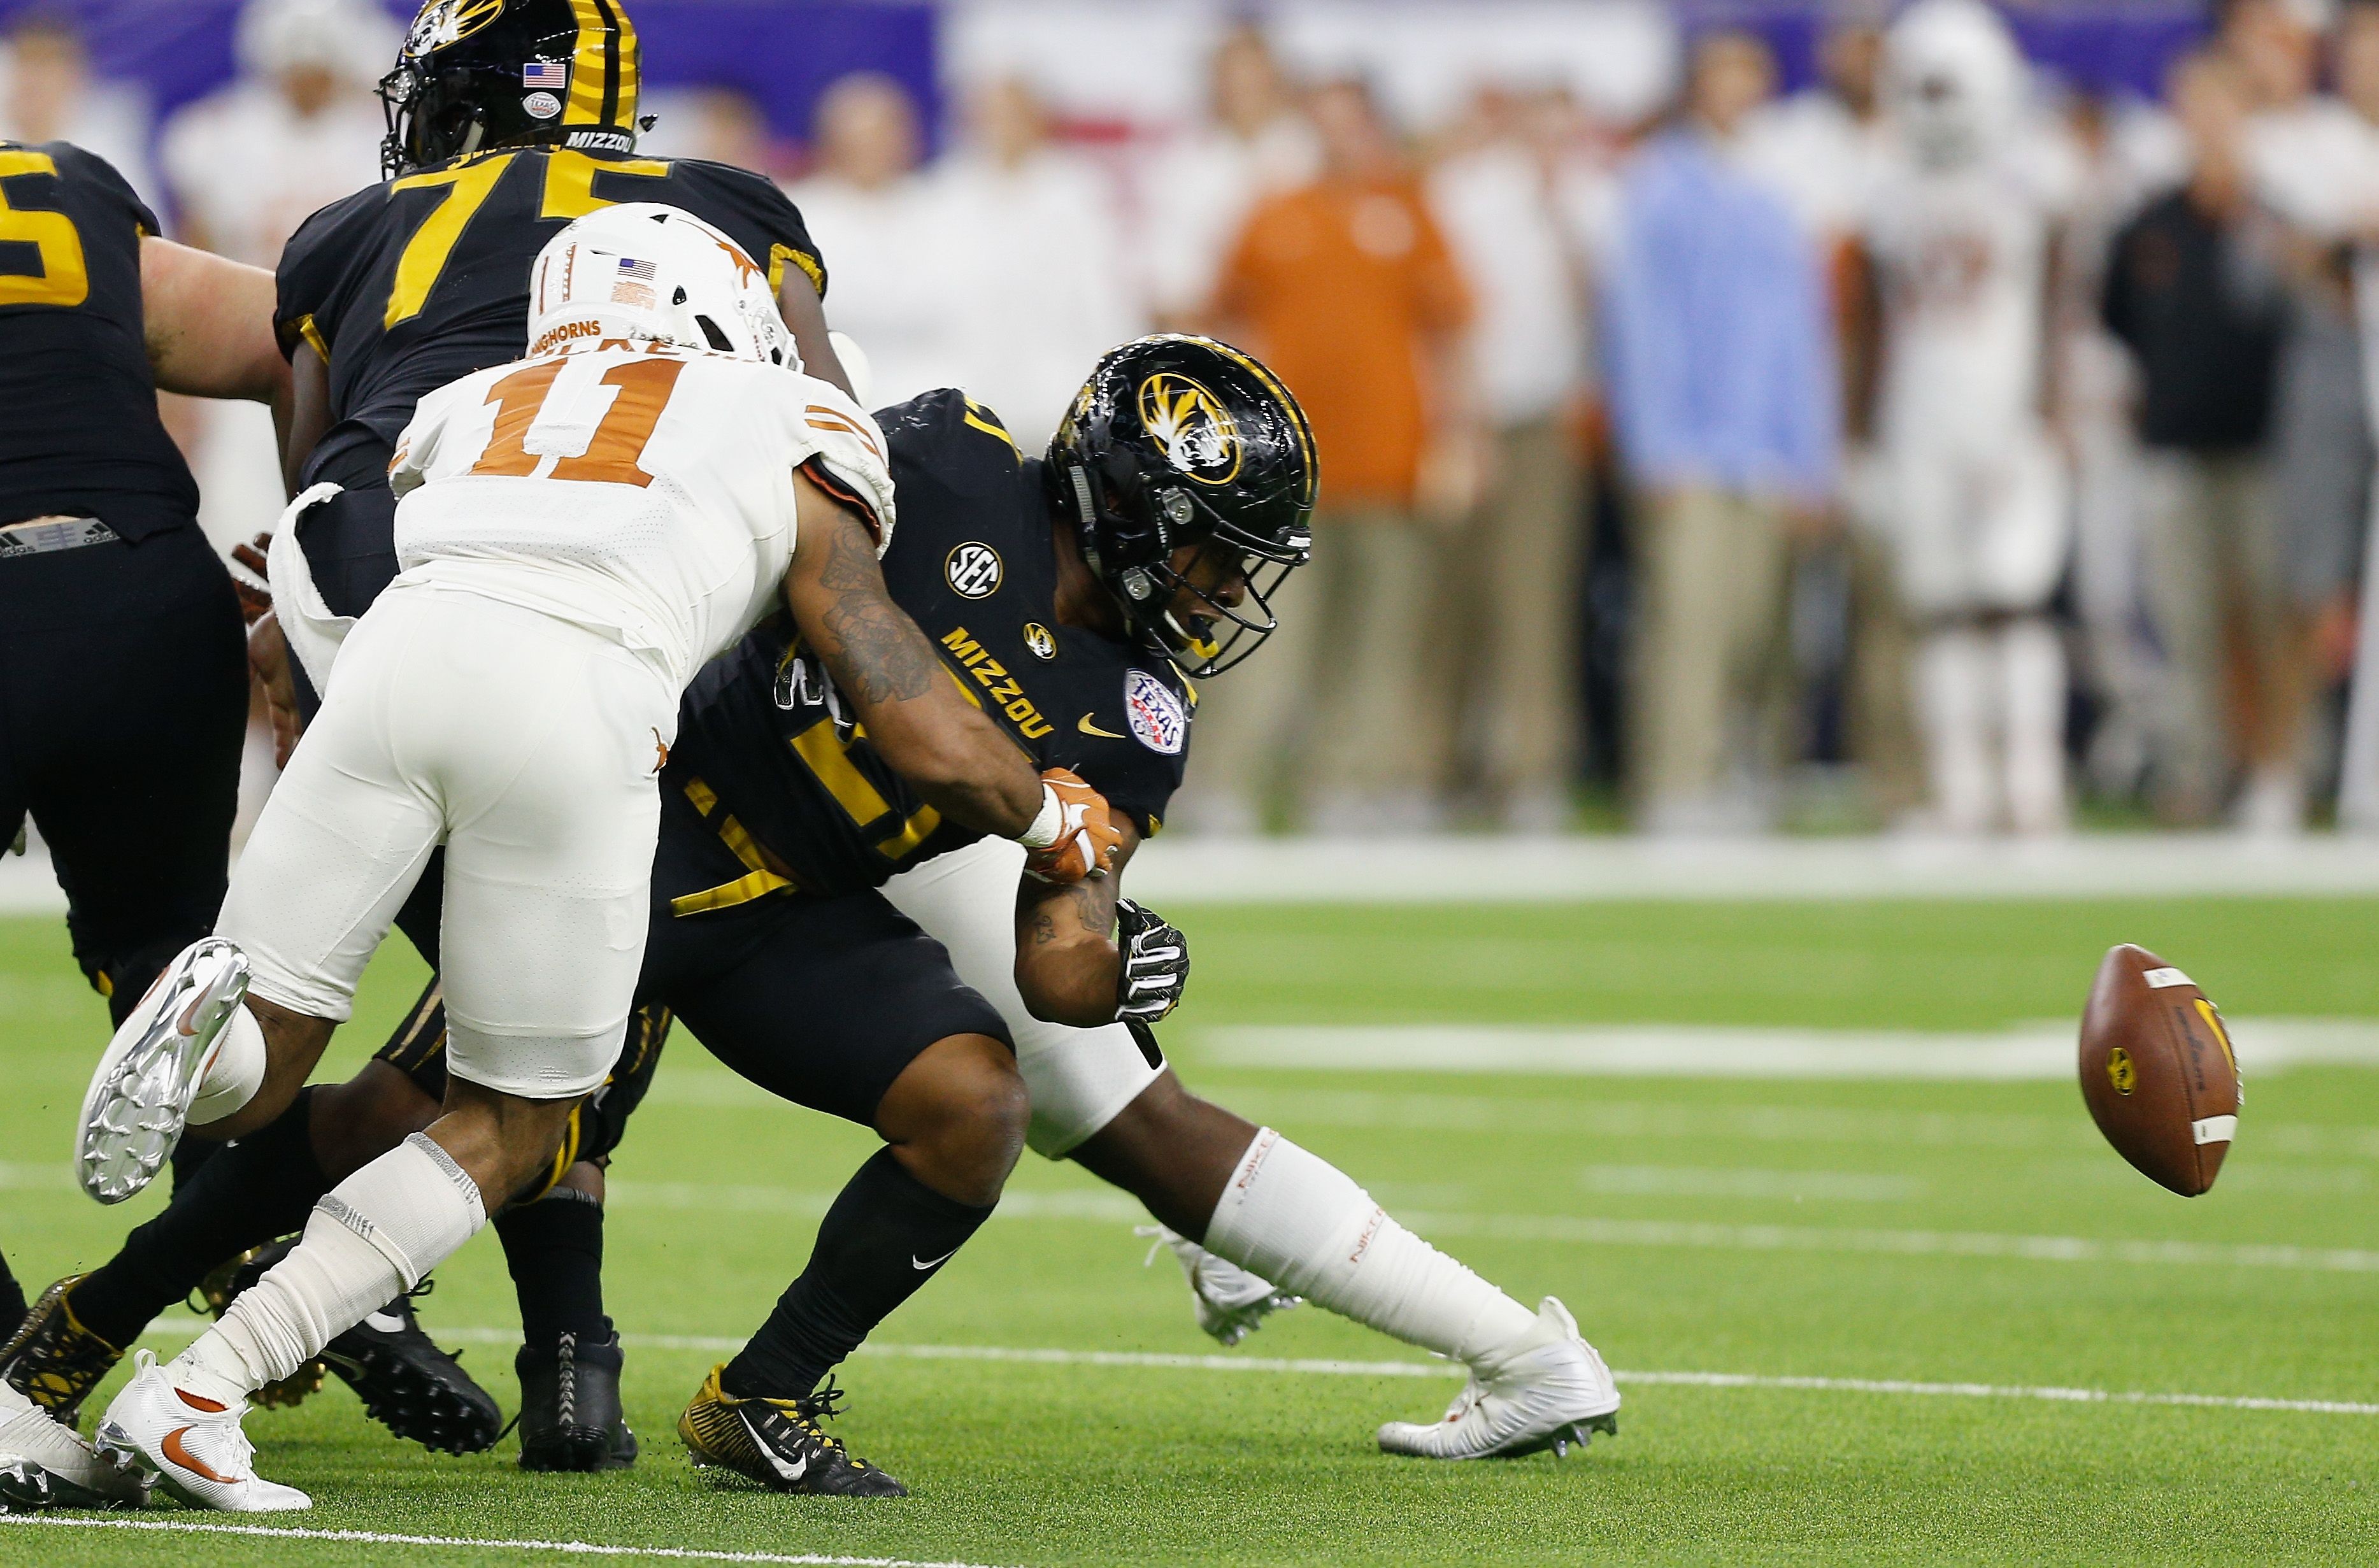 Missouri Football Tigers’ season ends with a loss to Texas